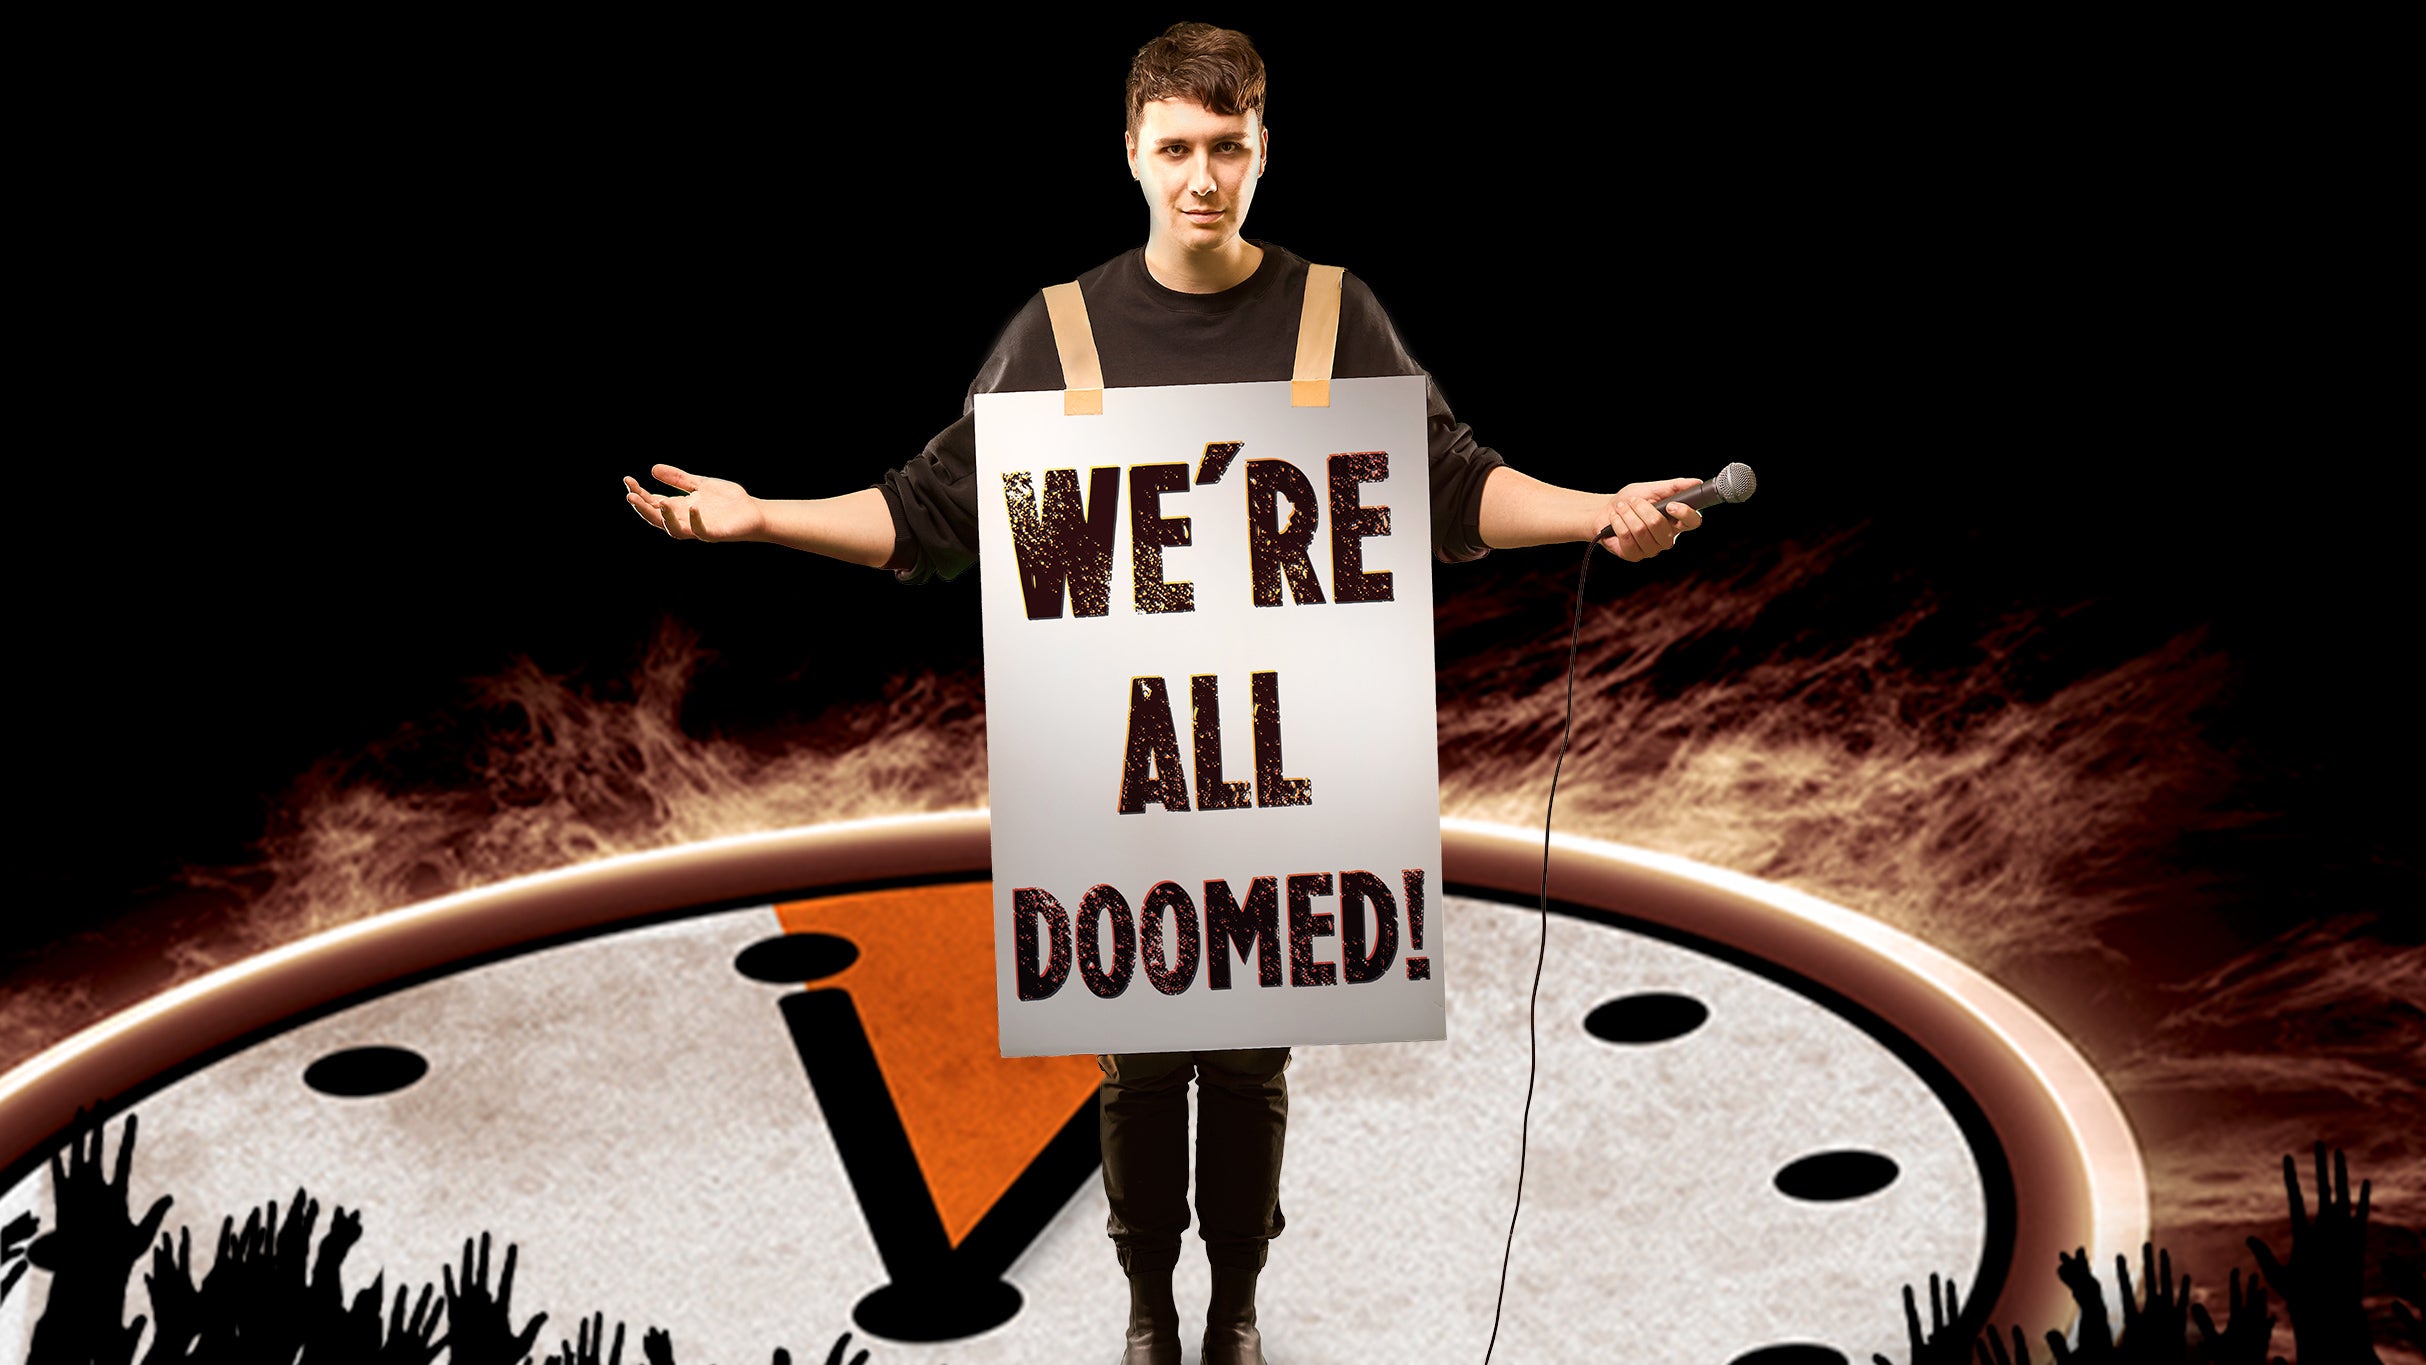 Daniel Howell: We're All Doomed! at Balboa Theatre